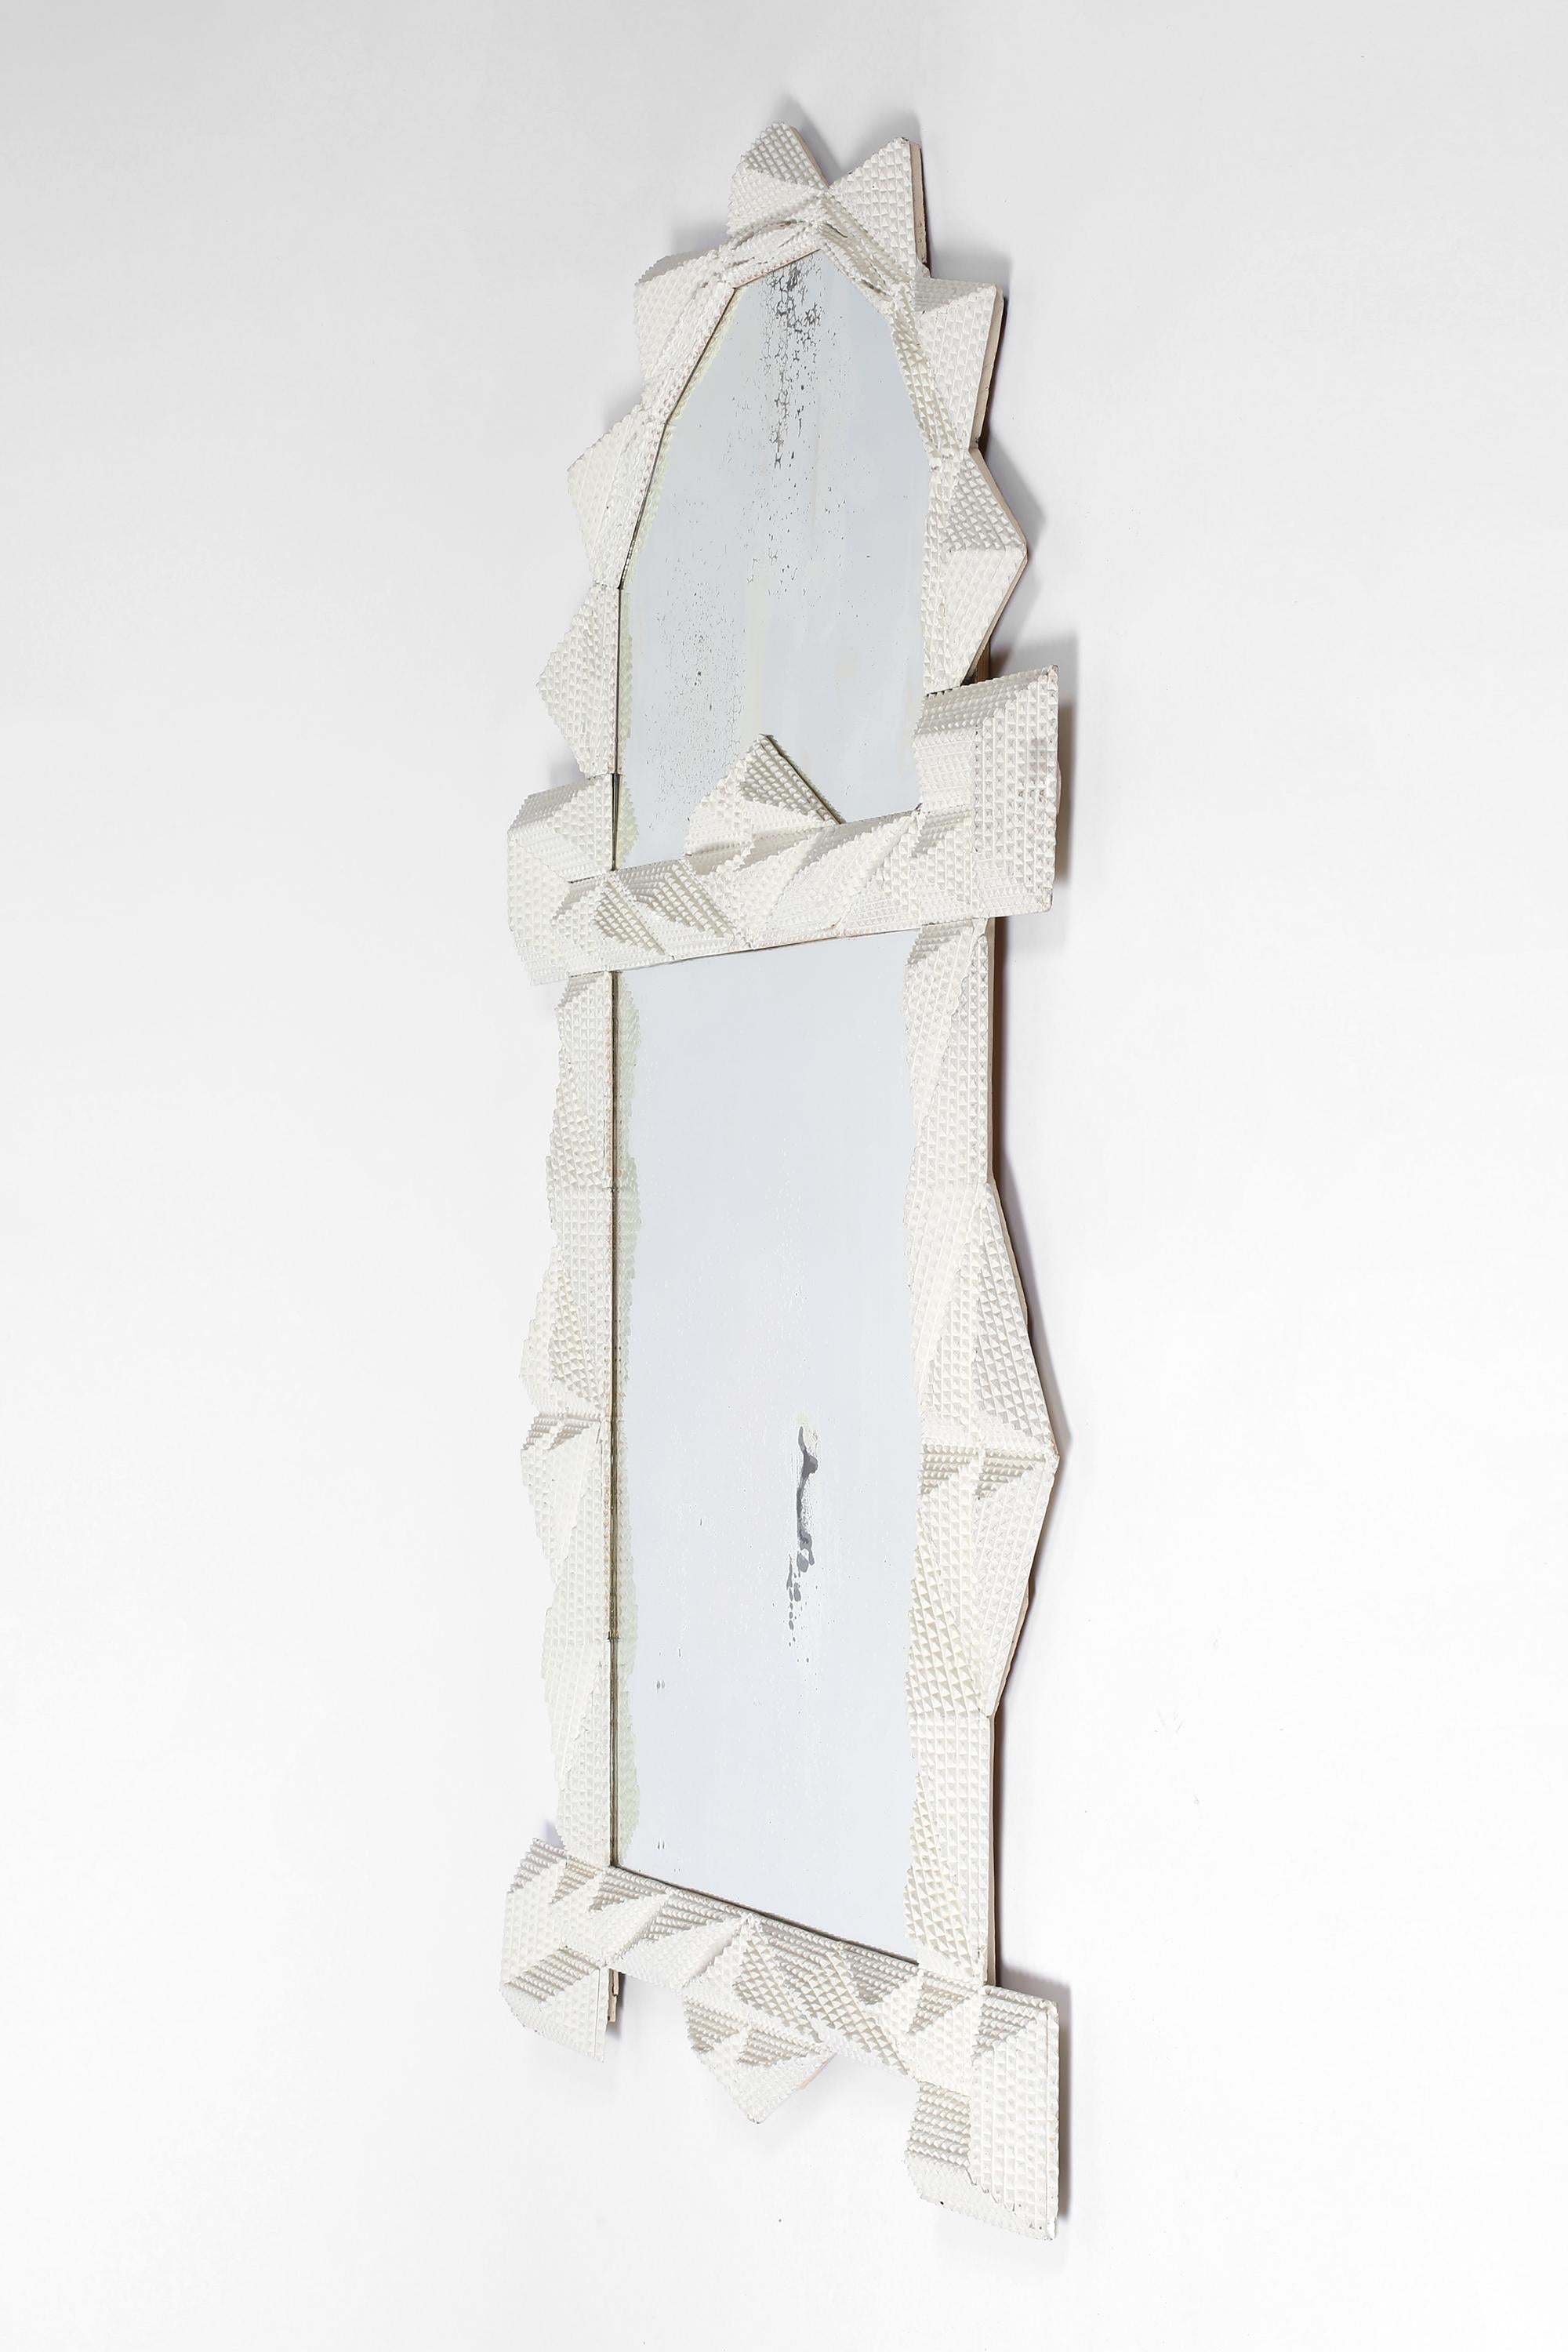 A monumental early 20th century ‘tramp art’ wall mirror - the extravagant frame later painted white, with its original attractively foxed plate. English, c. 1920.

Note: Small crack to the top plate as photographed, does not detract.